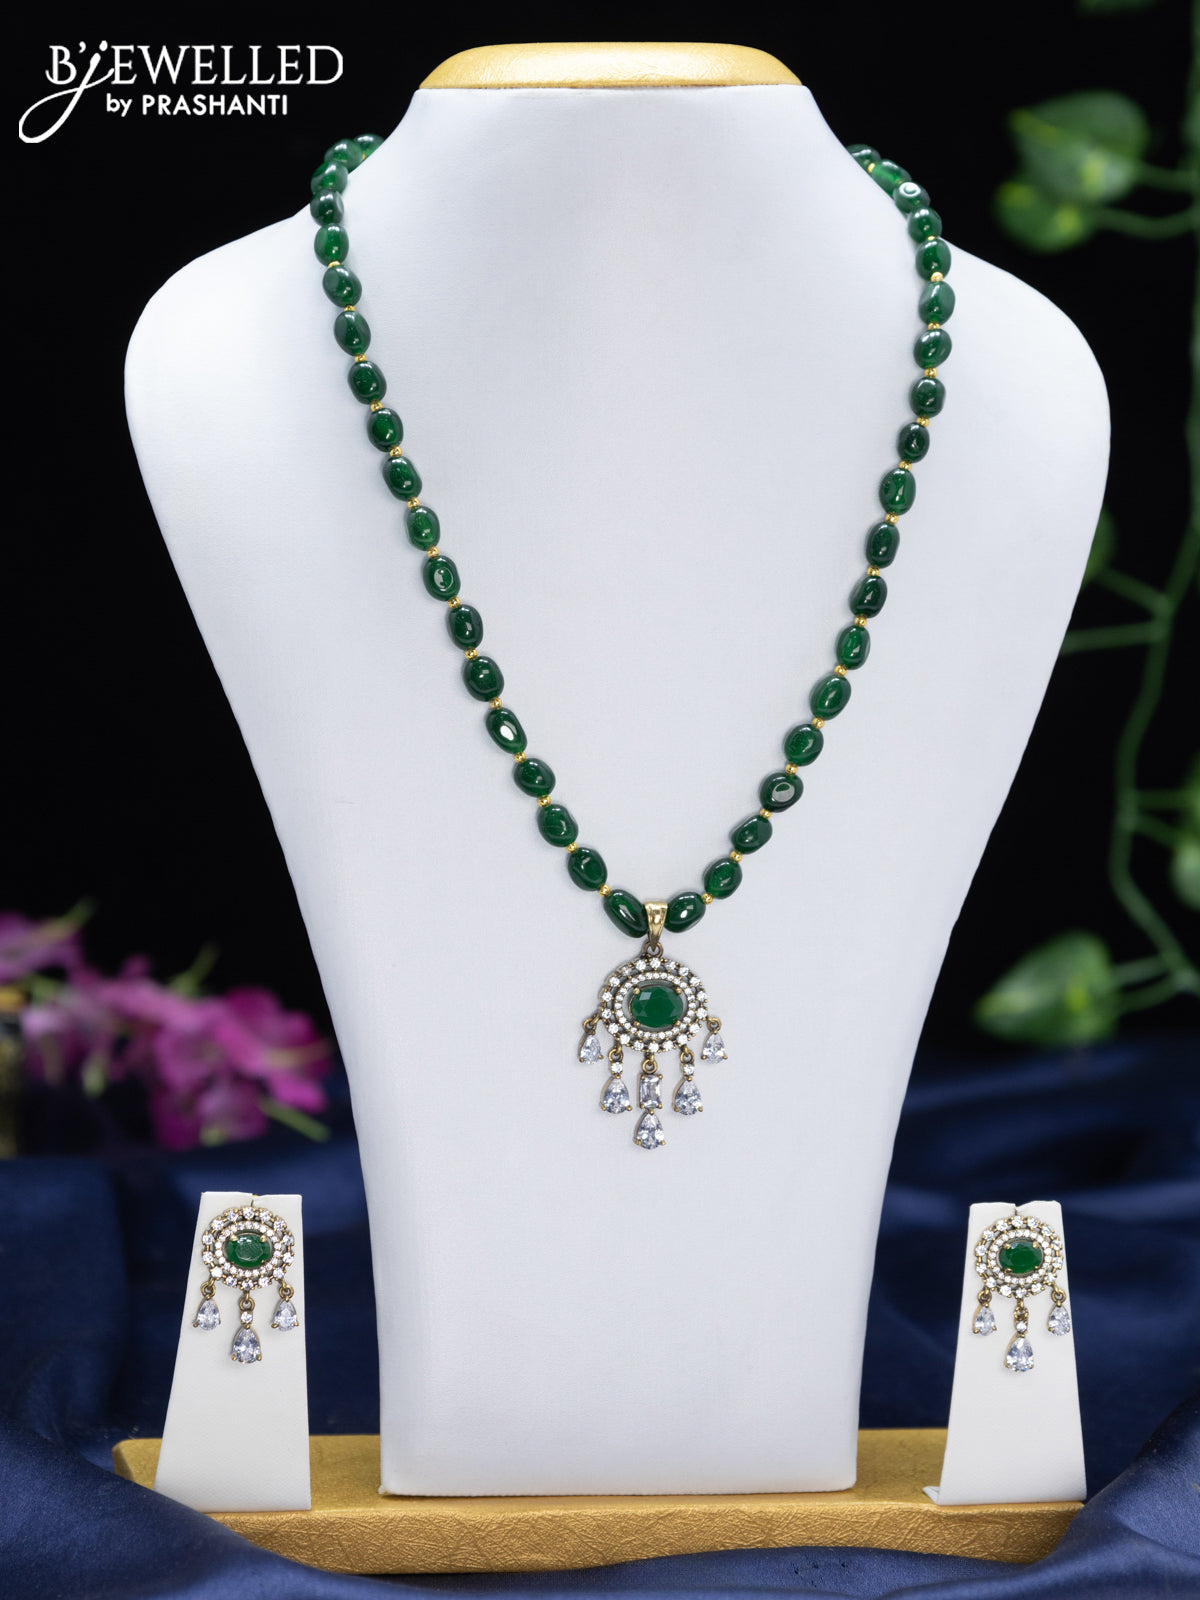 Beaded green necklace with emerald & cz stones and hangings in victorian finish